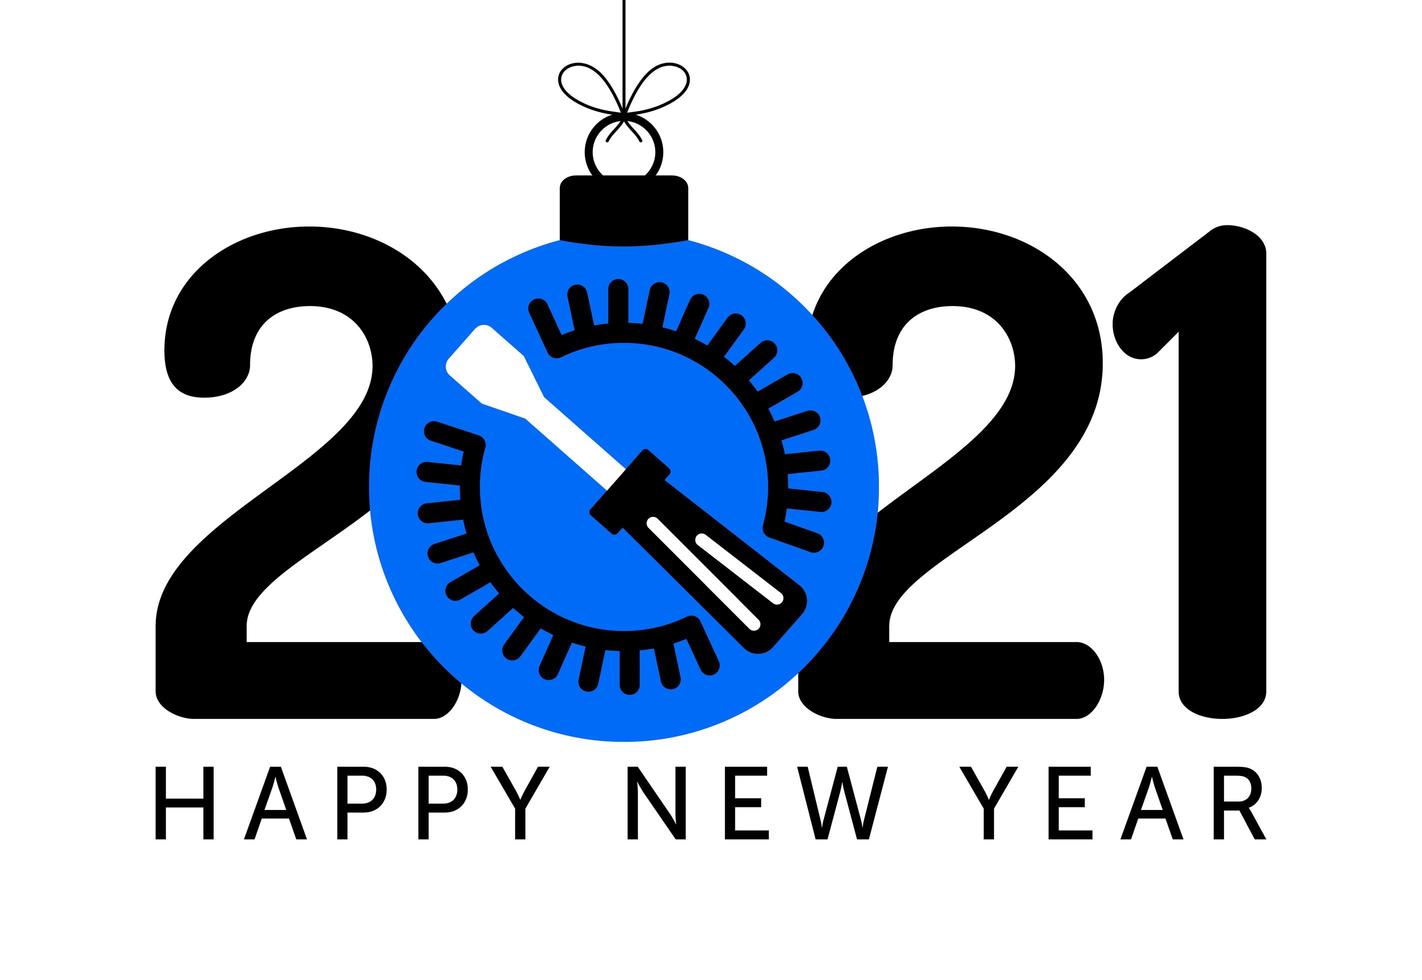 2021 new year greeting with screwdriver ornament vector